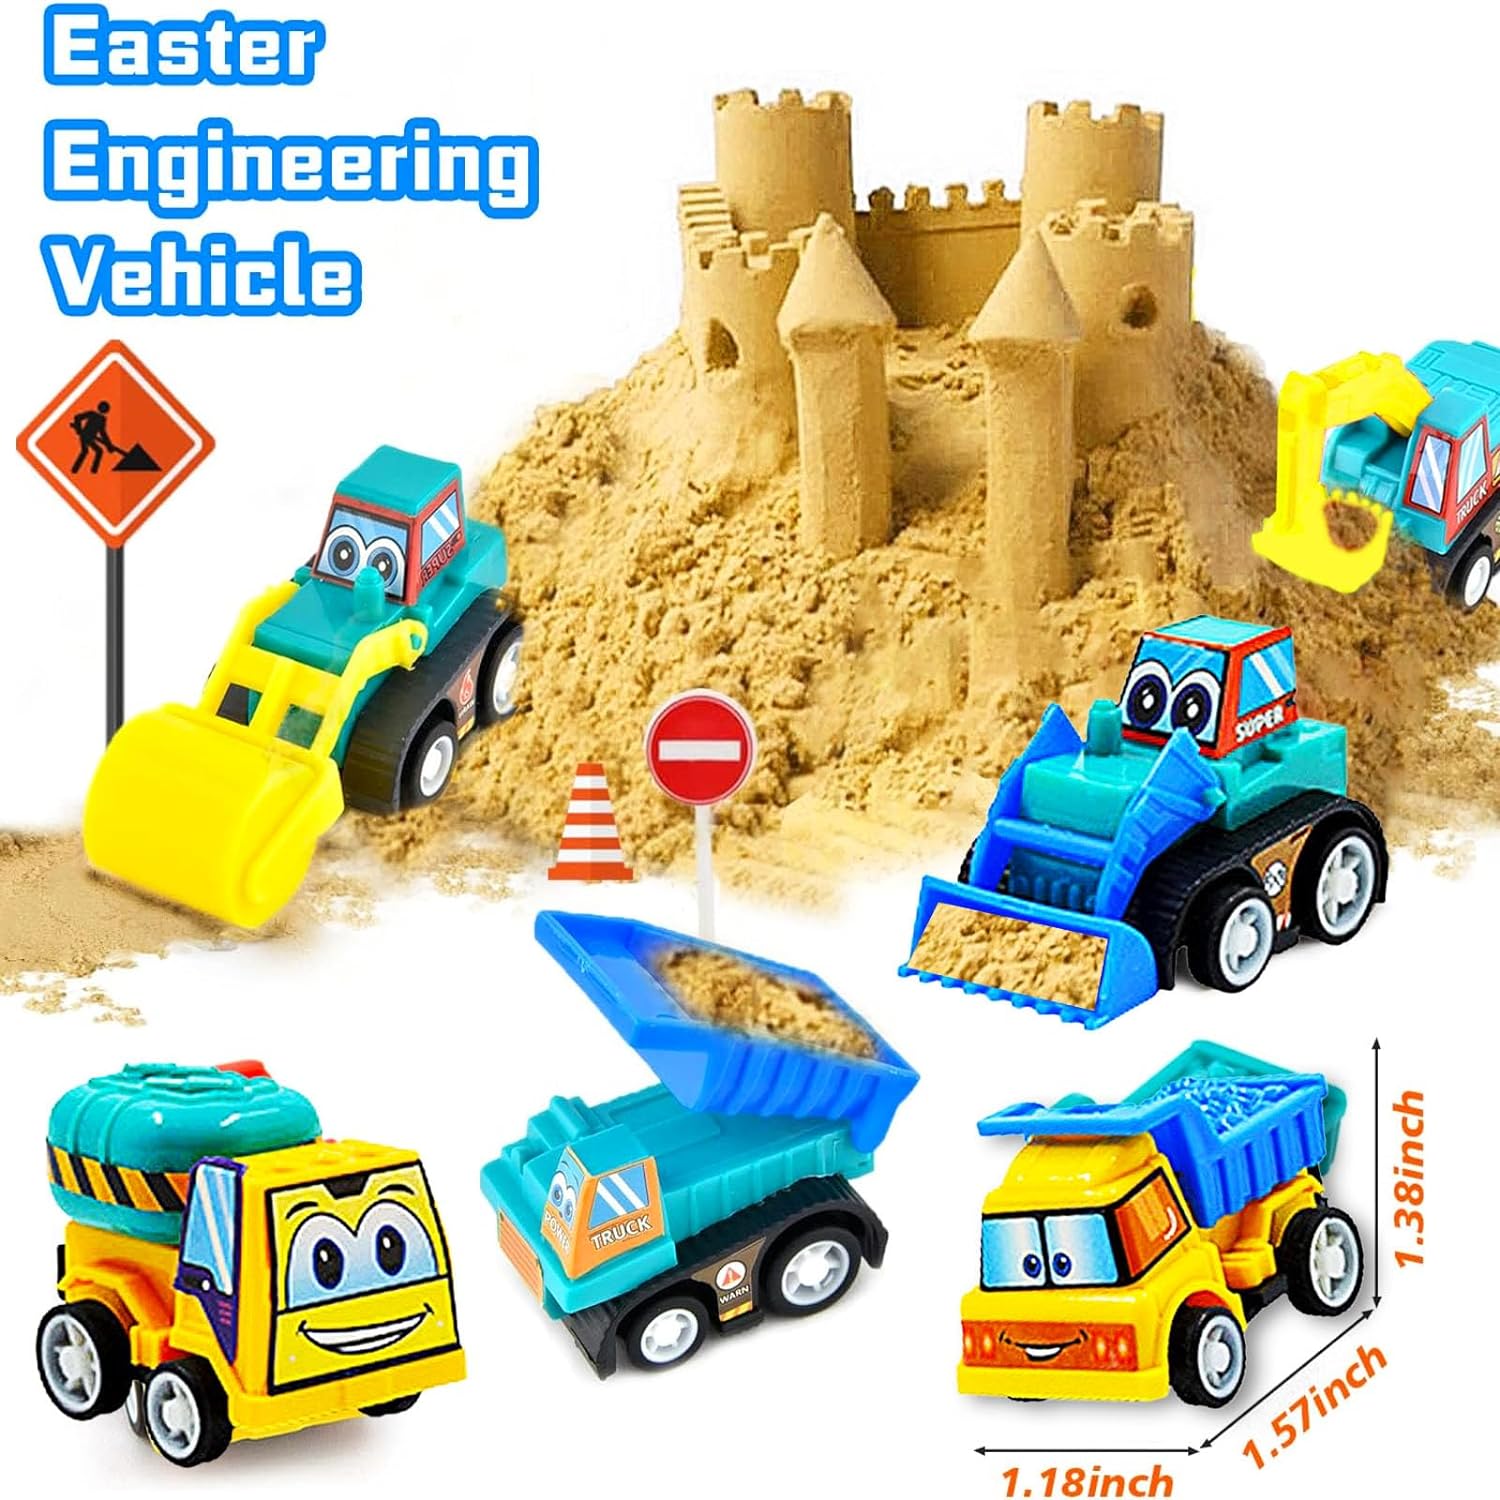 Easter Eggs with Toys Inside, 24Pcs Colorful Plastic Easter Eggs Filled with Toy Vehicles for Kids Cykapu